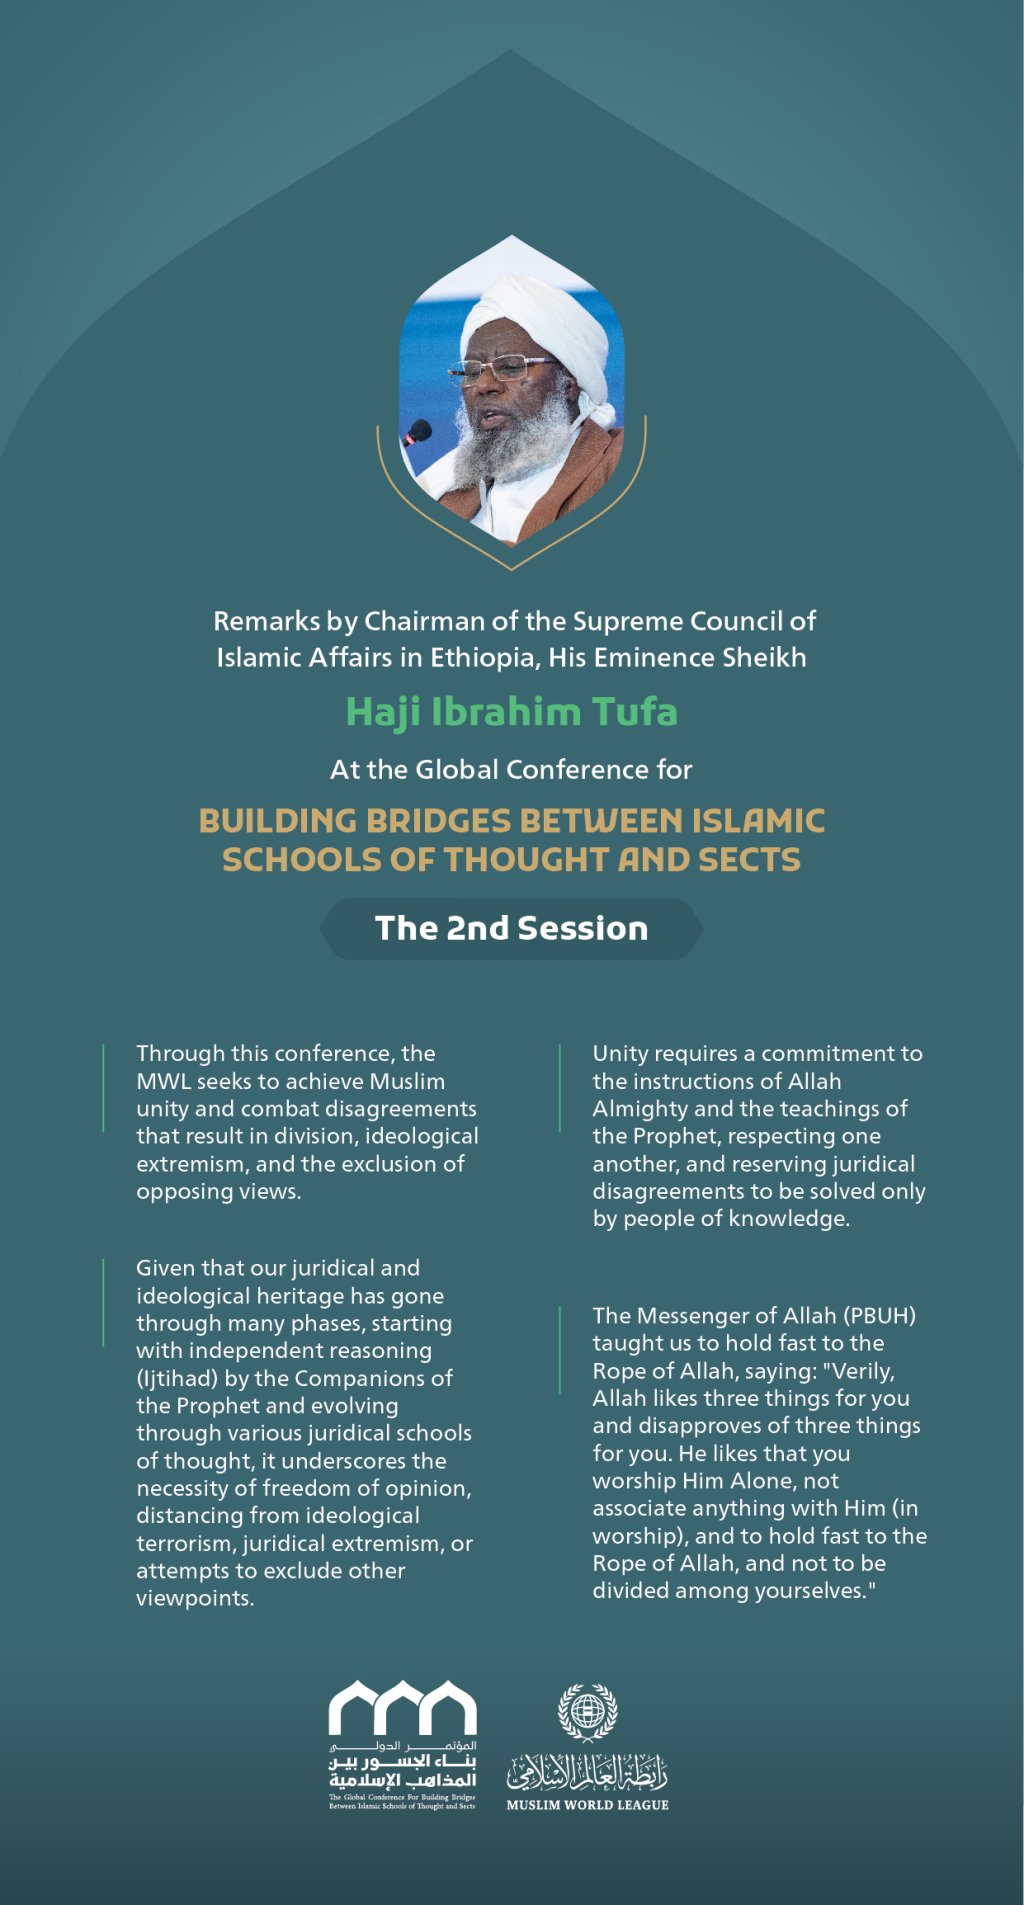 “The Rope of Allah Almighty.” Remarks by His Eminence Sheikh Haji Ibrahim Tufa, Chairman of the Supreme Council of Islamic Affairs in Ethiopia at the Global Conference for Building Bridges between Islamic Schools of Thought and Sects.